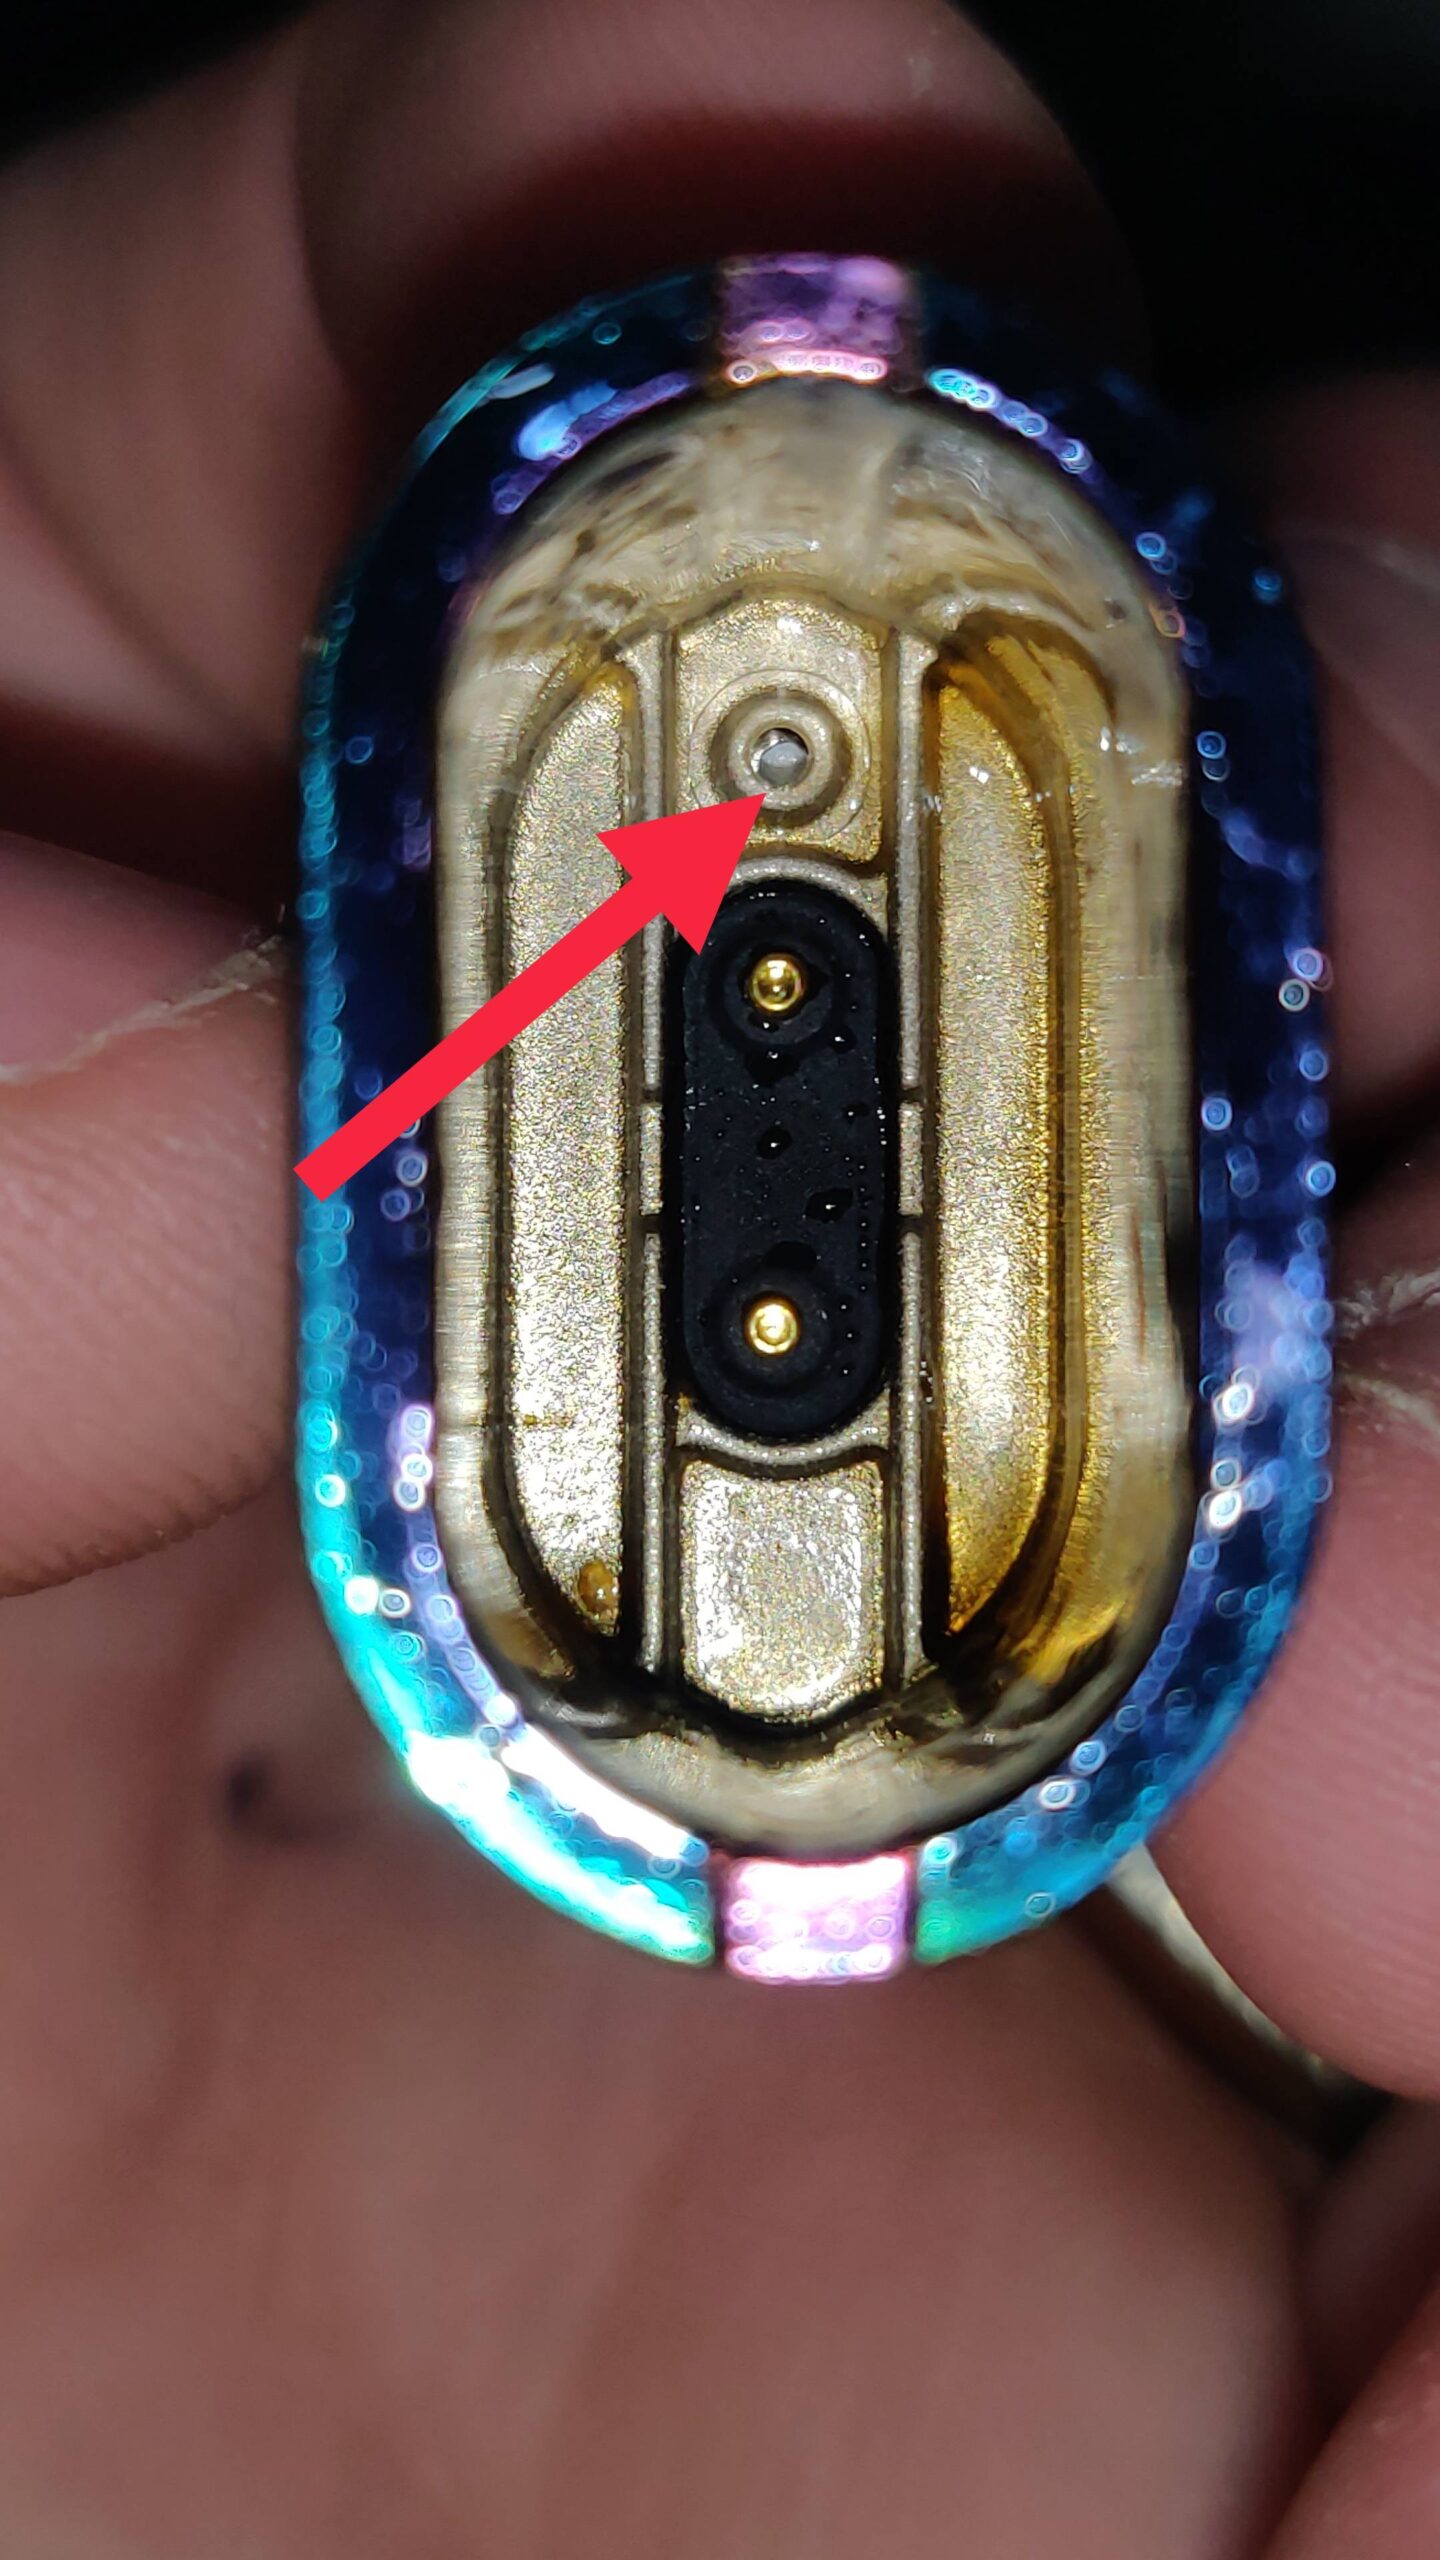 How To Fix Air Fire Only On Smok Novo 5